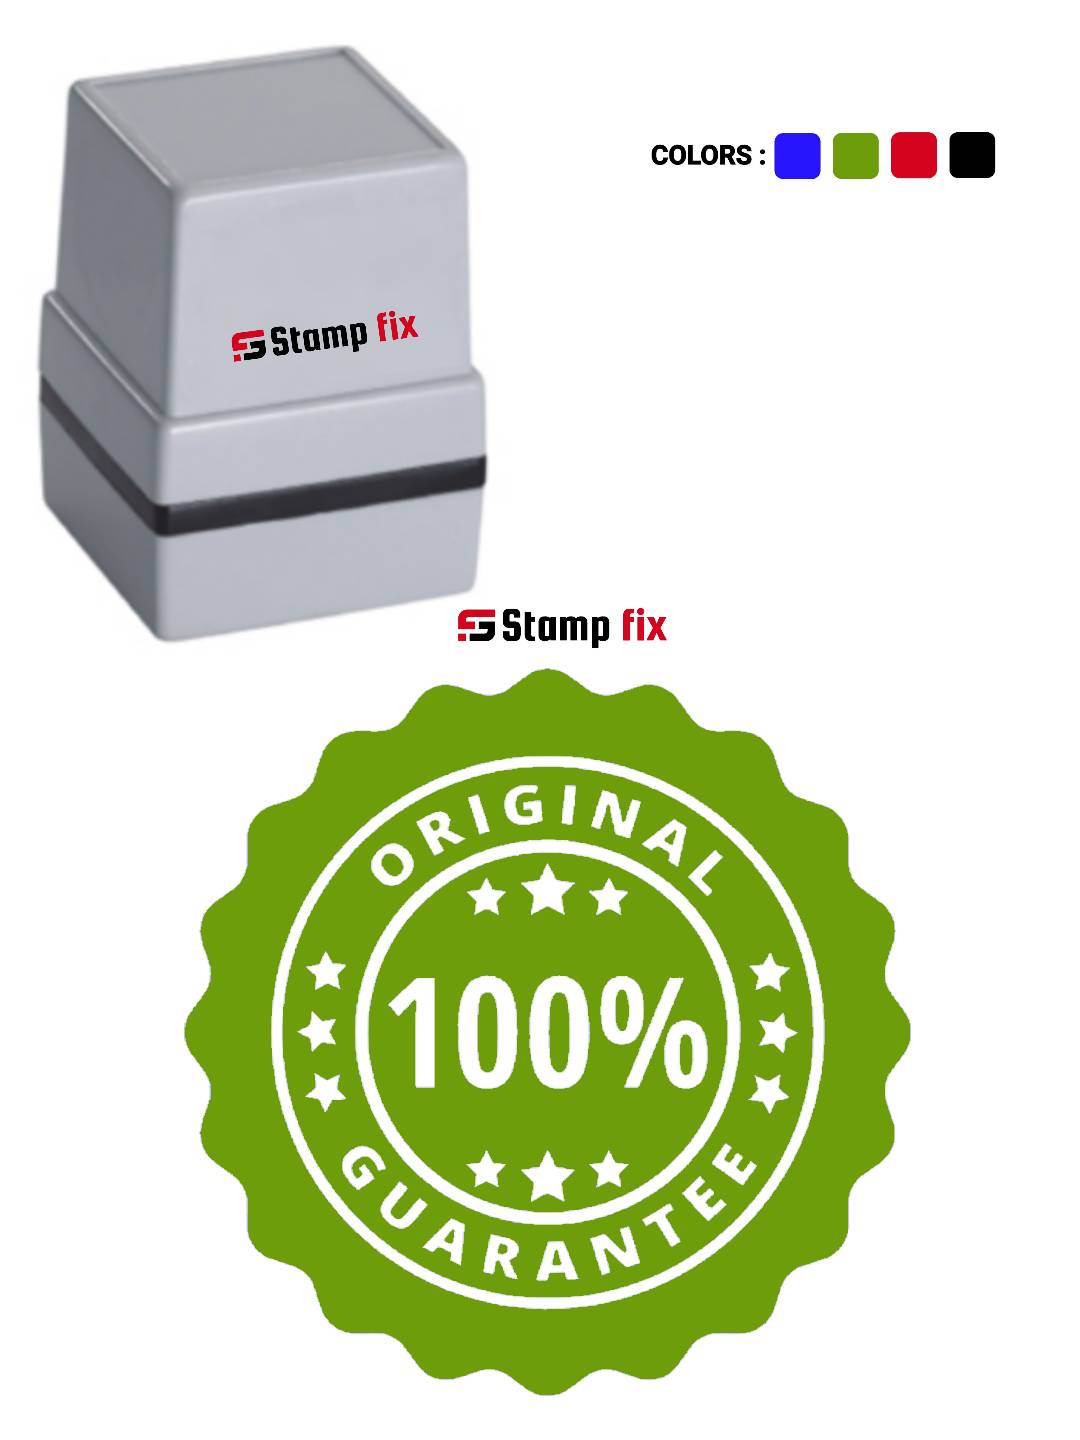 Pre Ink Original Stamp by StampFix, a self-inking stamp with high-quality impressions